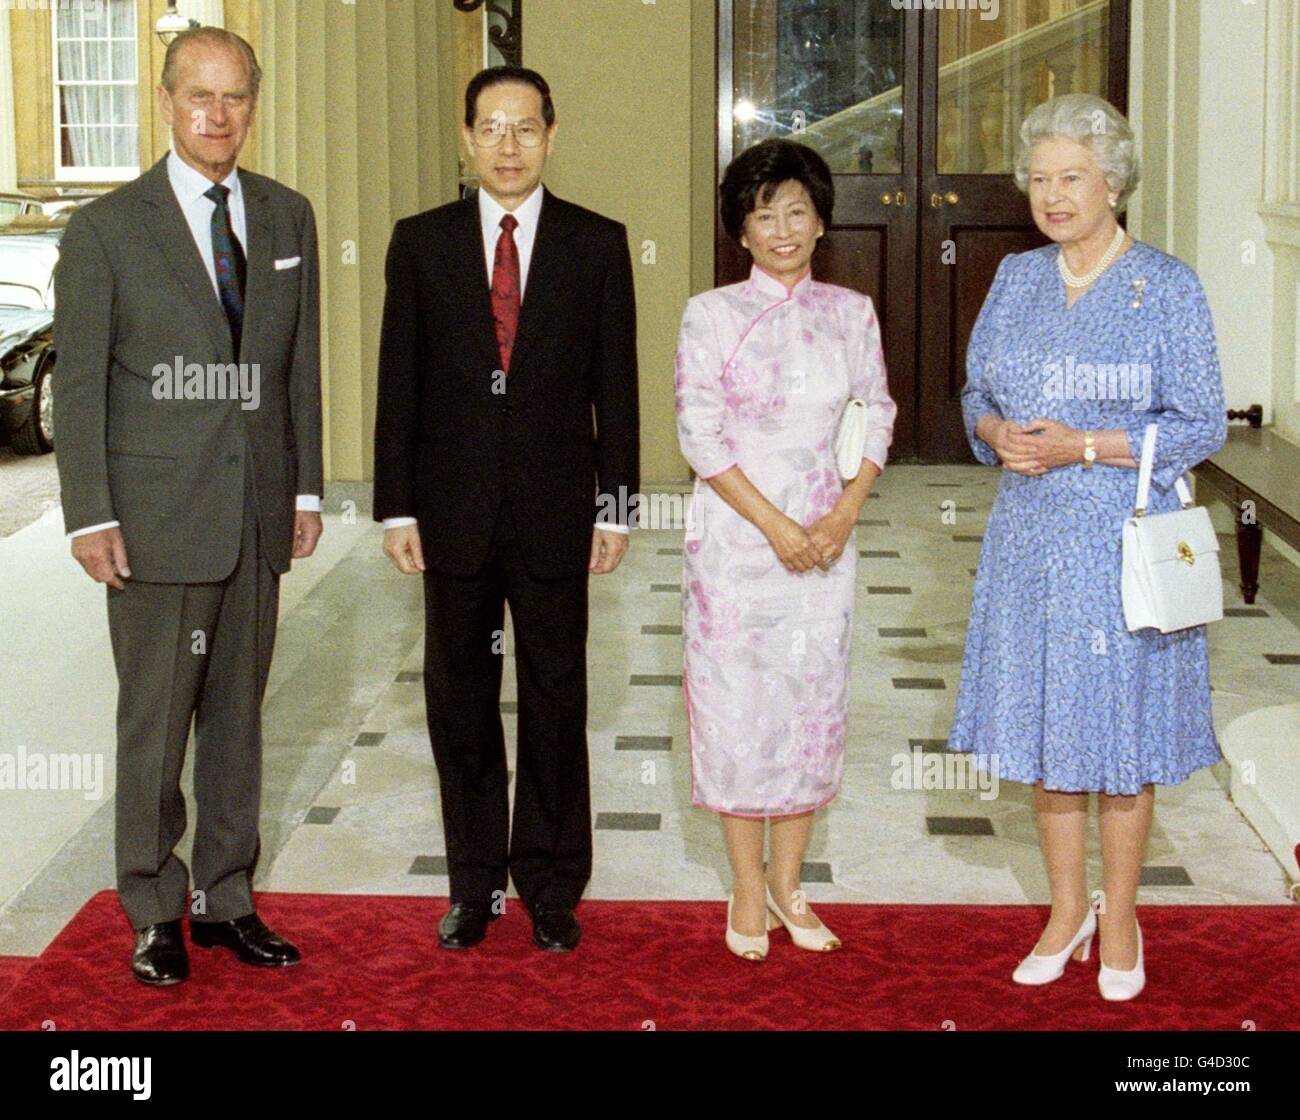 The Duke of Edinburgh (L) and the Queen (R) greet the President of Singapore Ong Teng Cheong and his wife Mrs Cheong on their arrival at Buckingham Palace. The President is on a five day official visit to Britain. Stock Photo